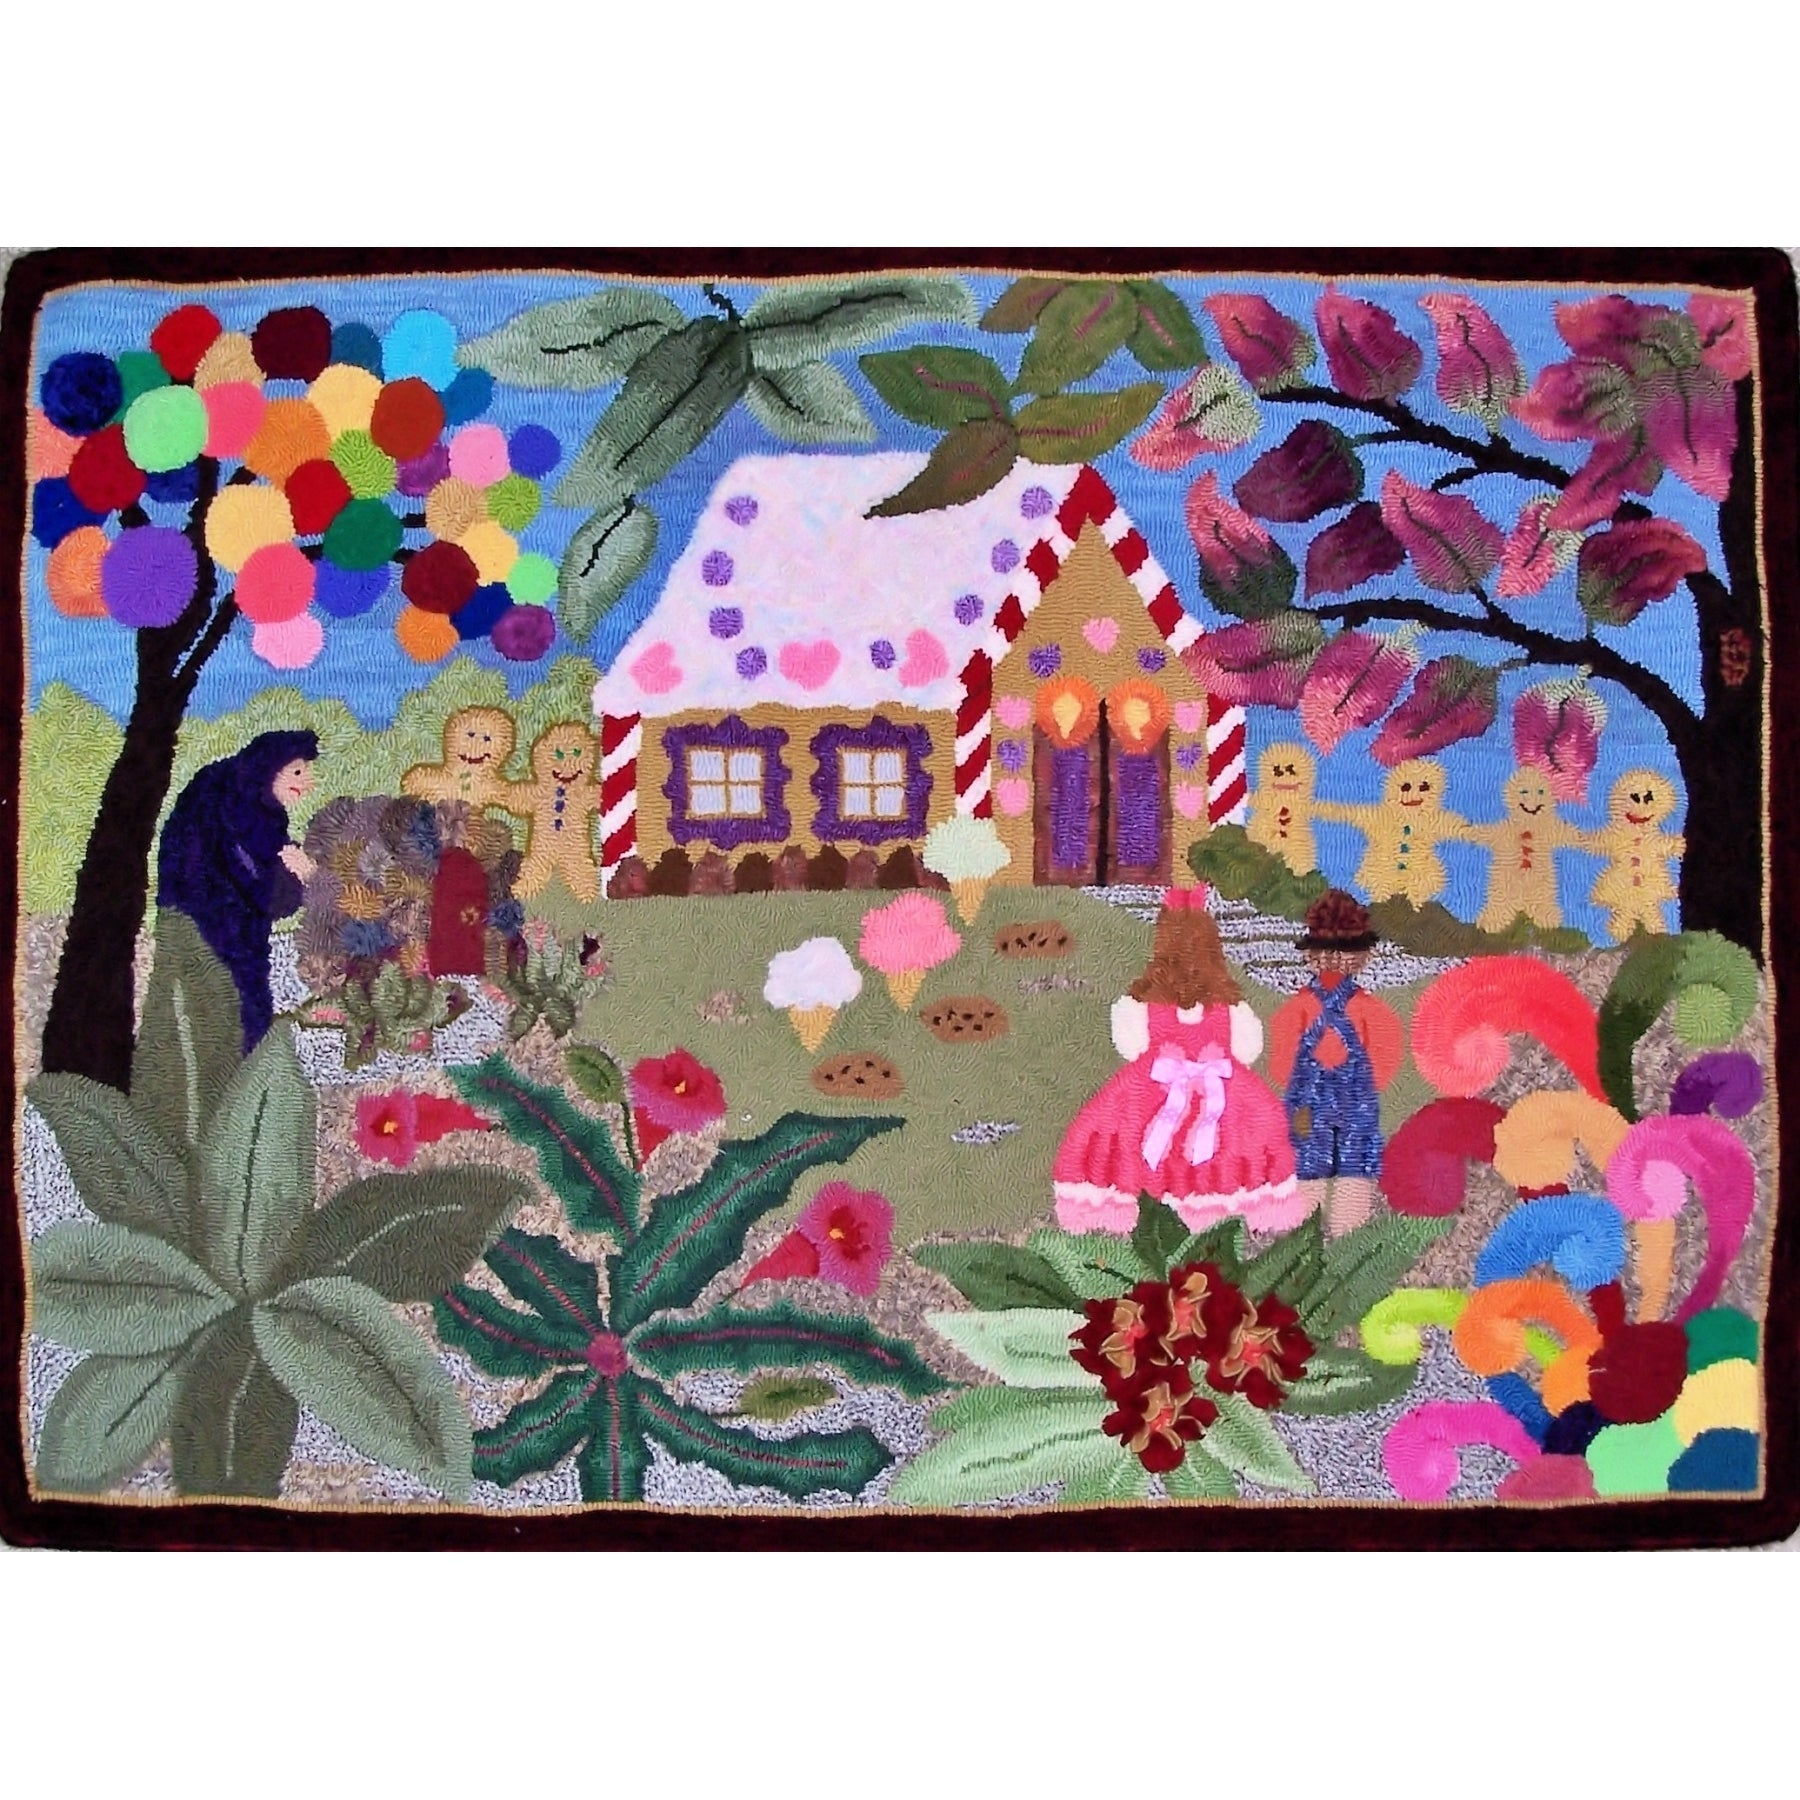 Hansel and Gretel, rug hooked by Kathryn Fleming Kovaric